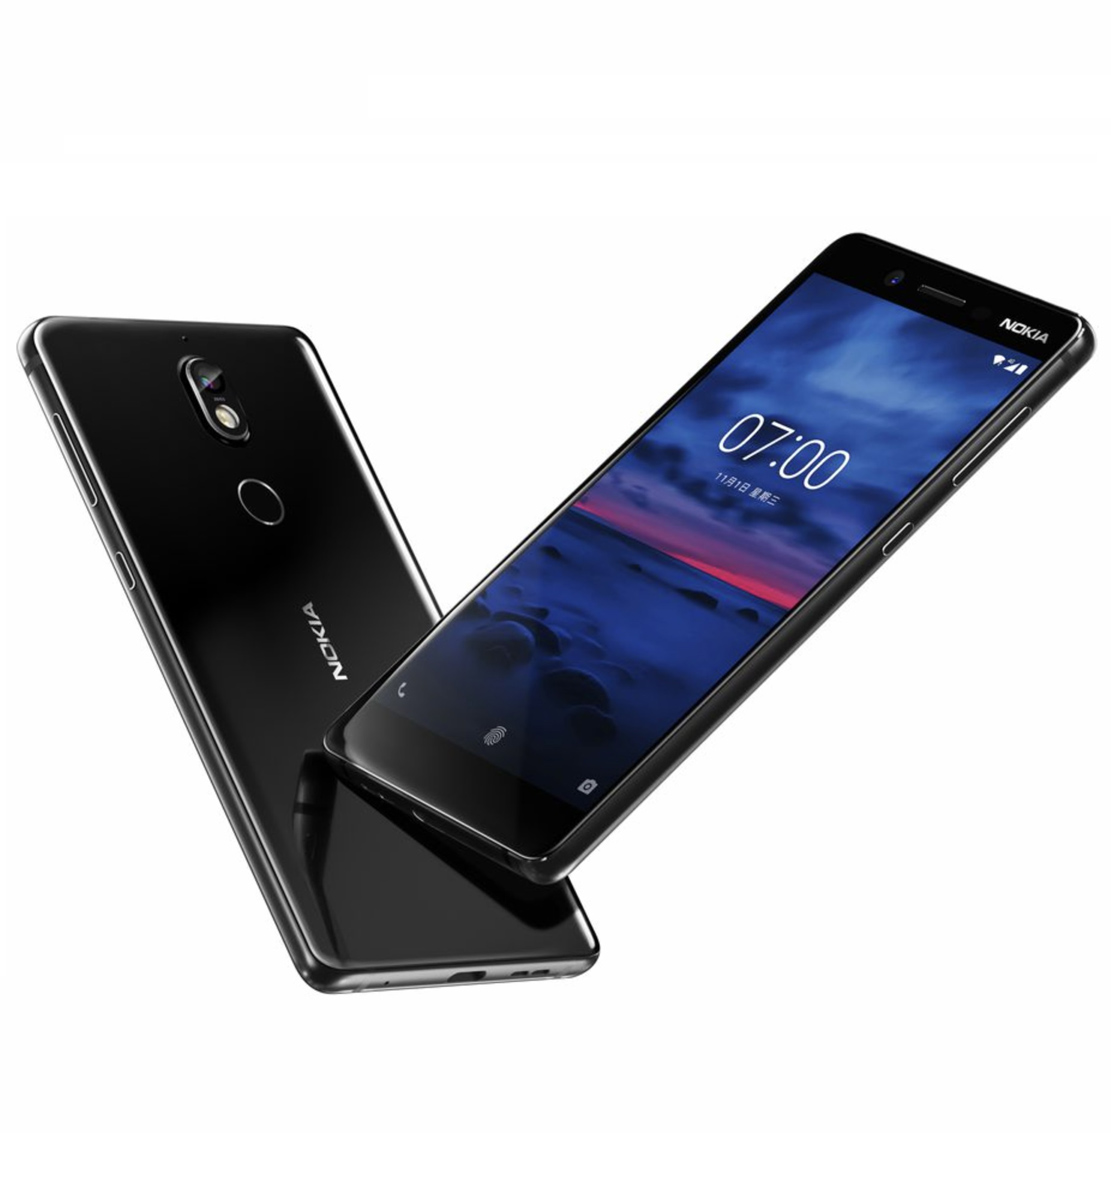 Demo plus and 7 nokia price pakistan specifications in blade